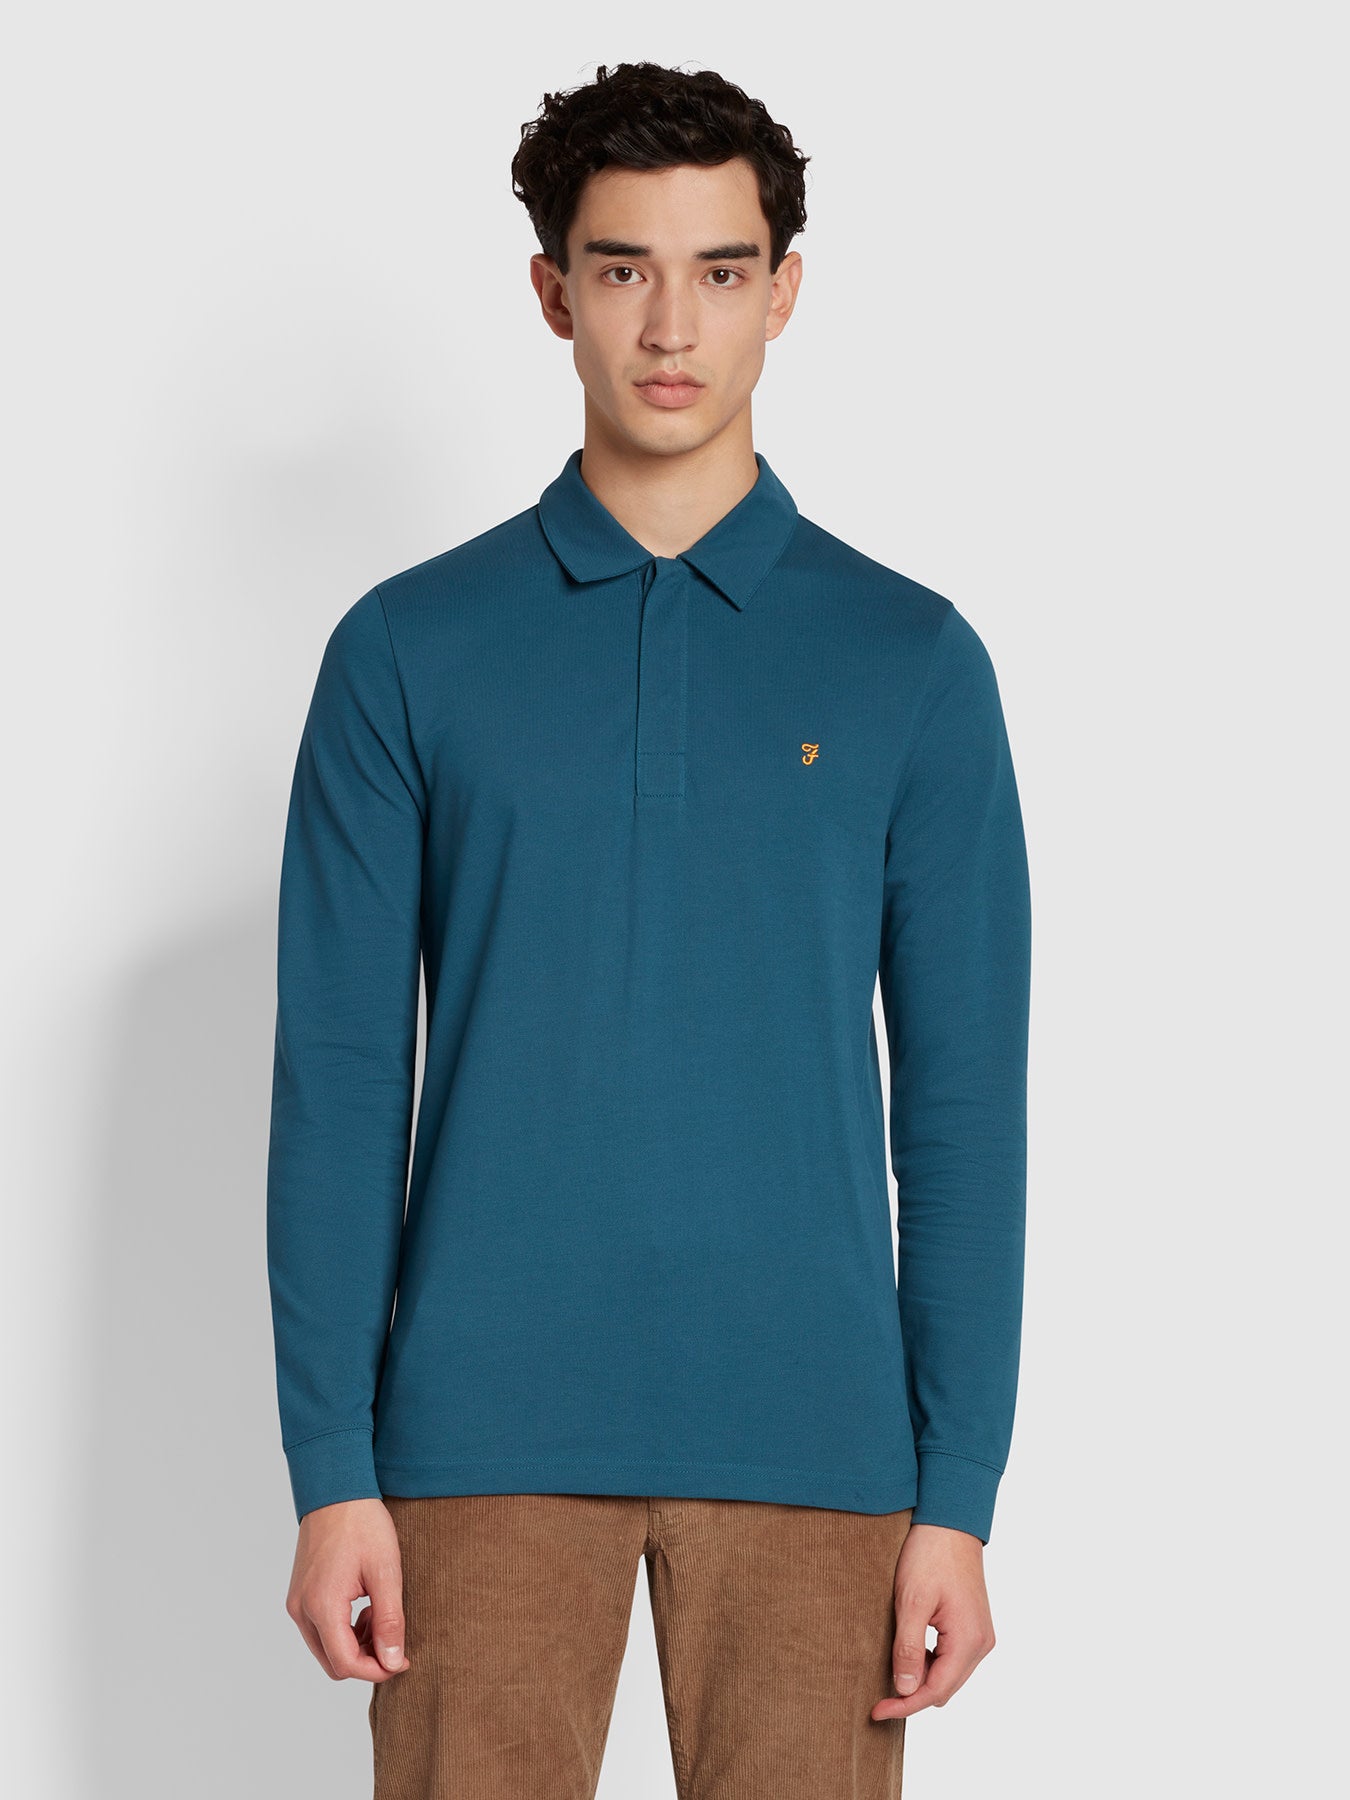 View Haslam Slim Fit Organic Cotton Polo Shirt In Atlantic information